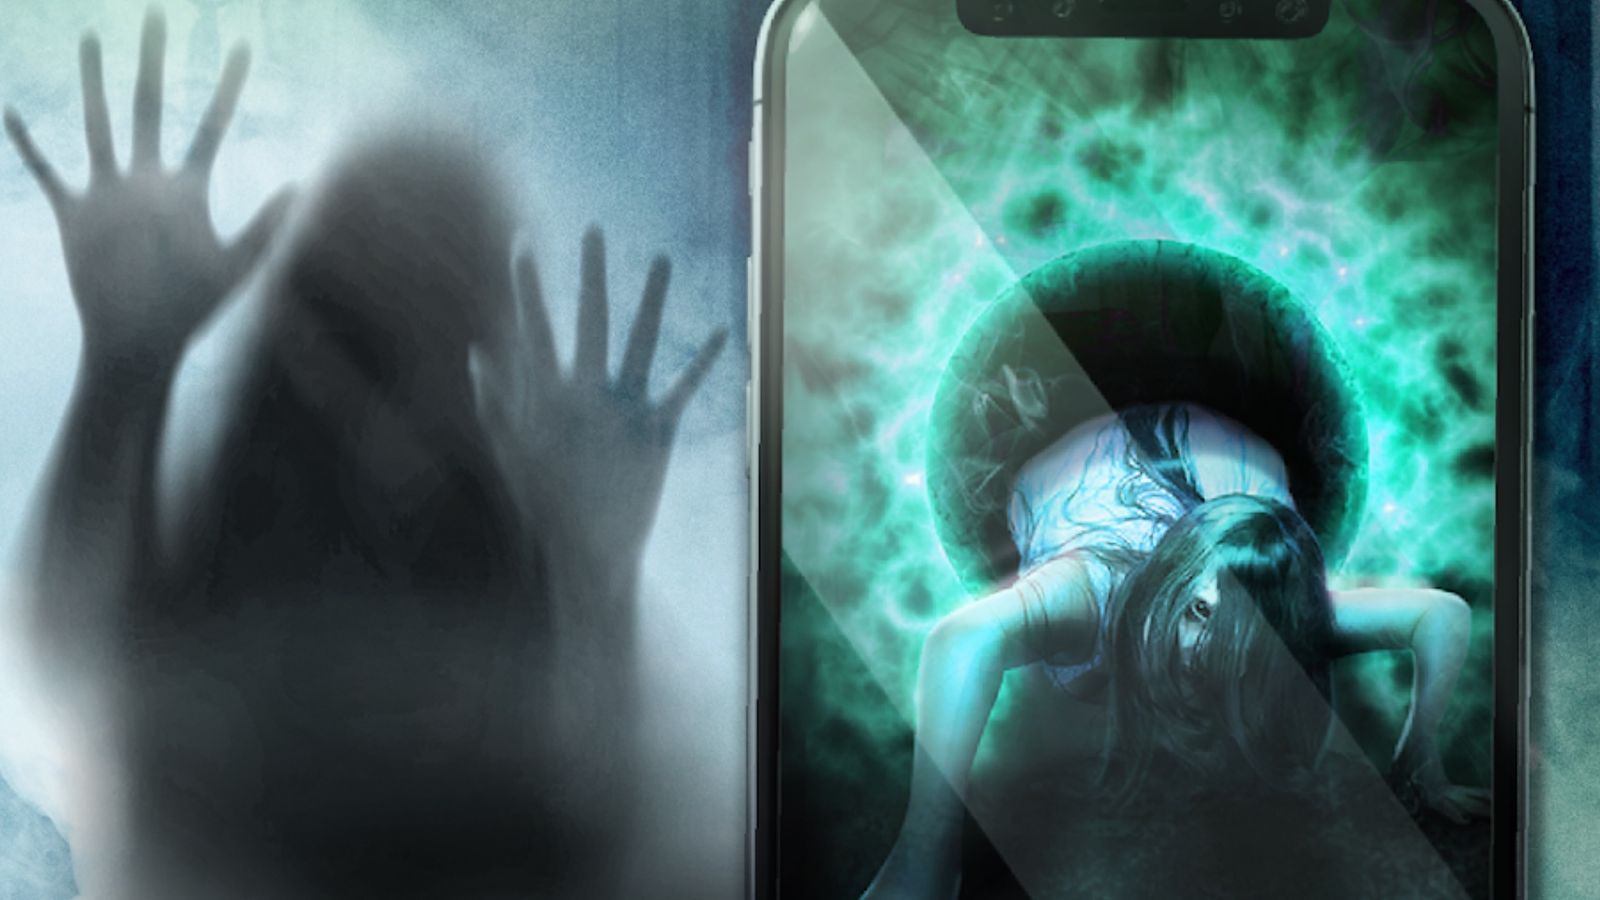 Screenshot from The Sign, showing a haunted ghost girl crawling out of a phone screen